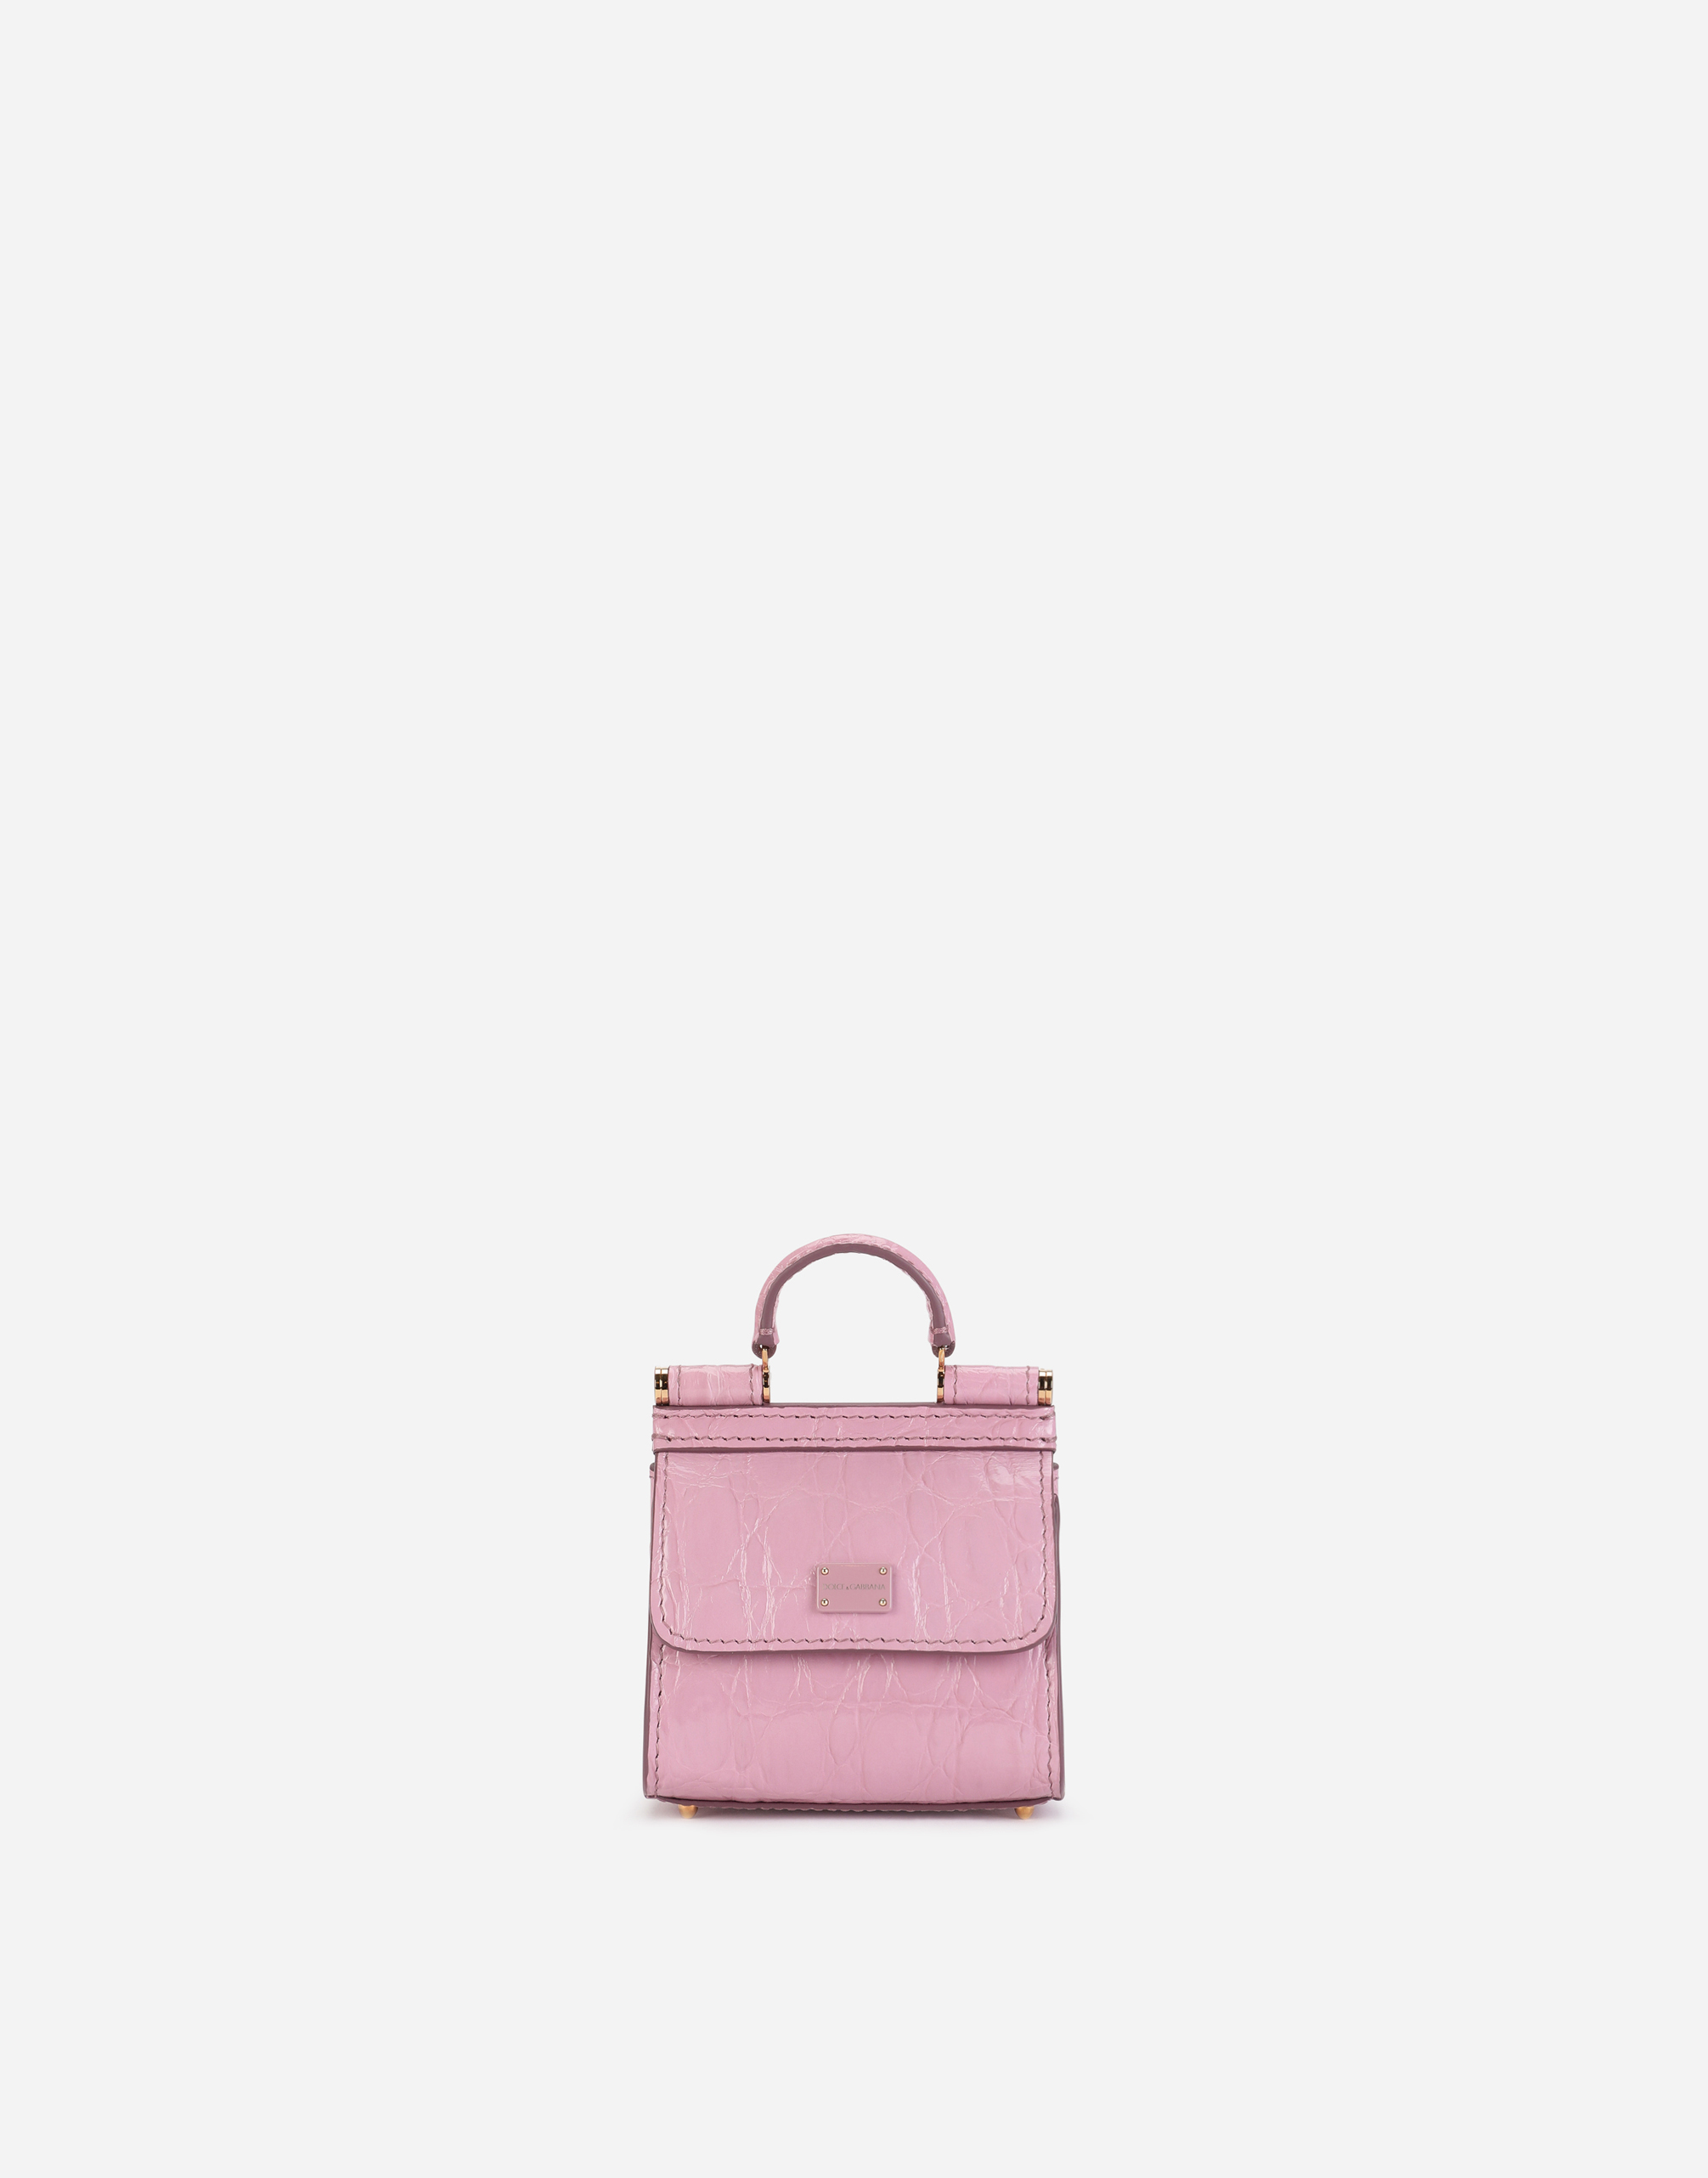 Sicily 58 micro bag in crocodile flank leather in Pink